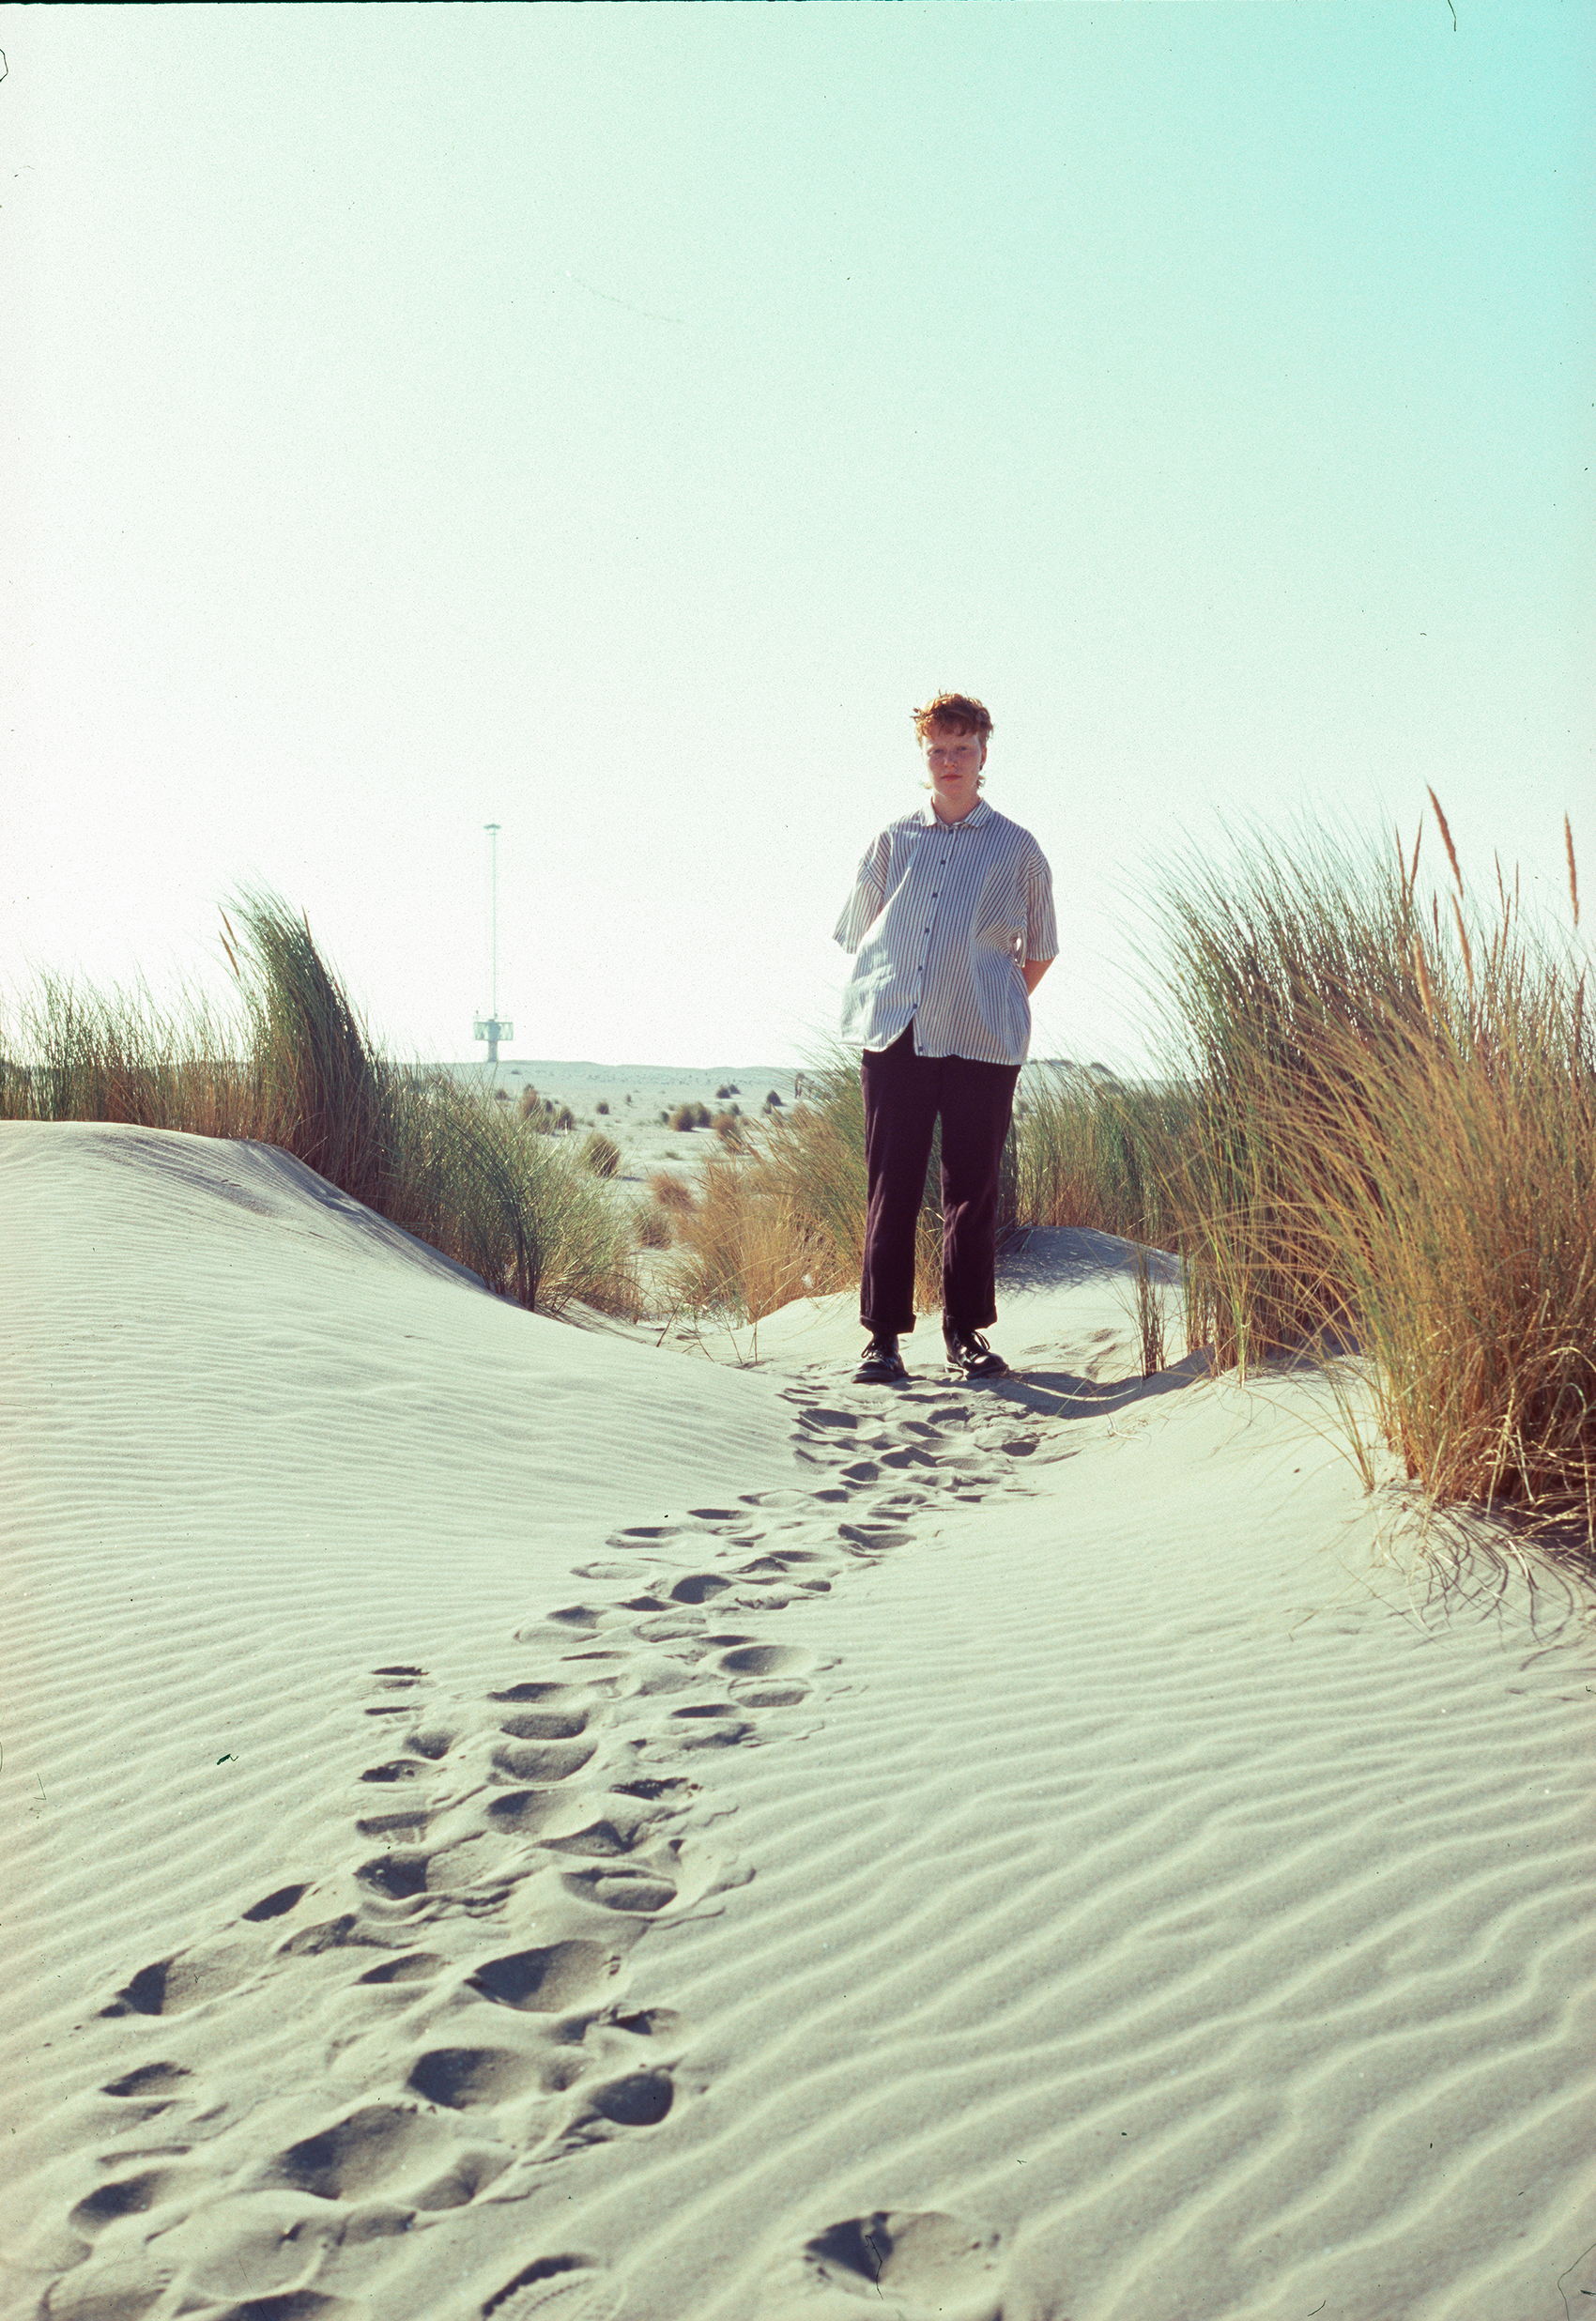 Flo Verhulst - photo of a ginger person standing on sand dunes with tall grass. They wear black pants and a white and blue shirt.